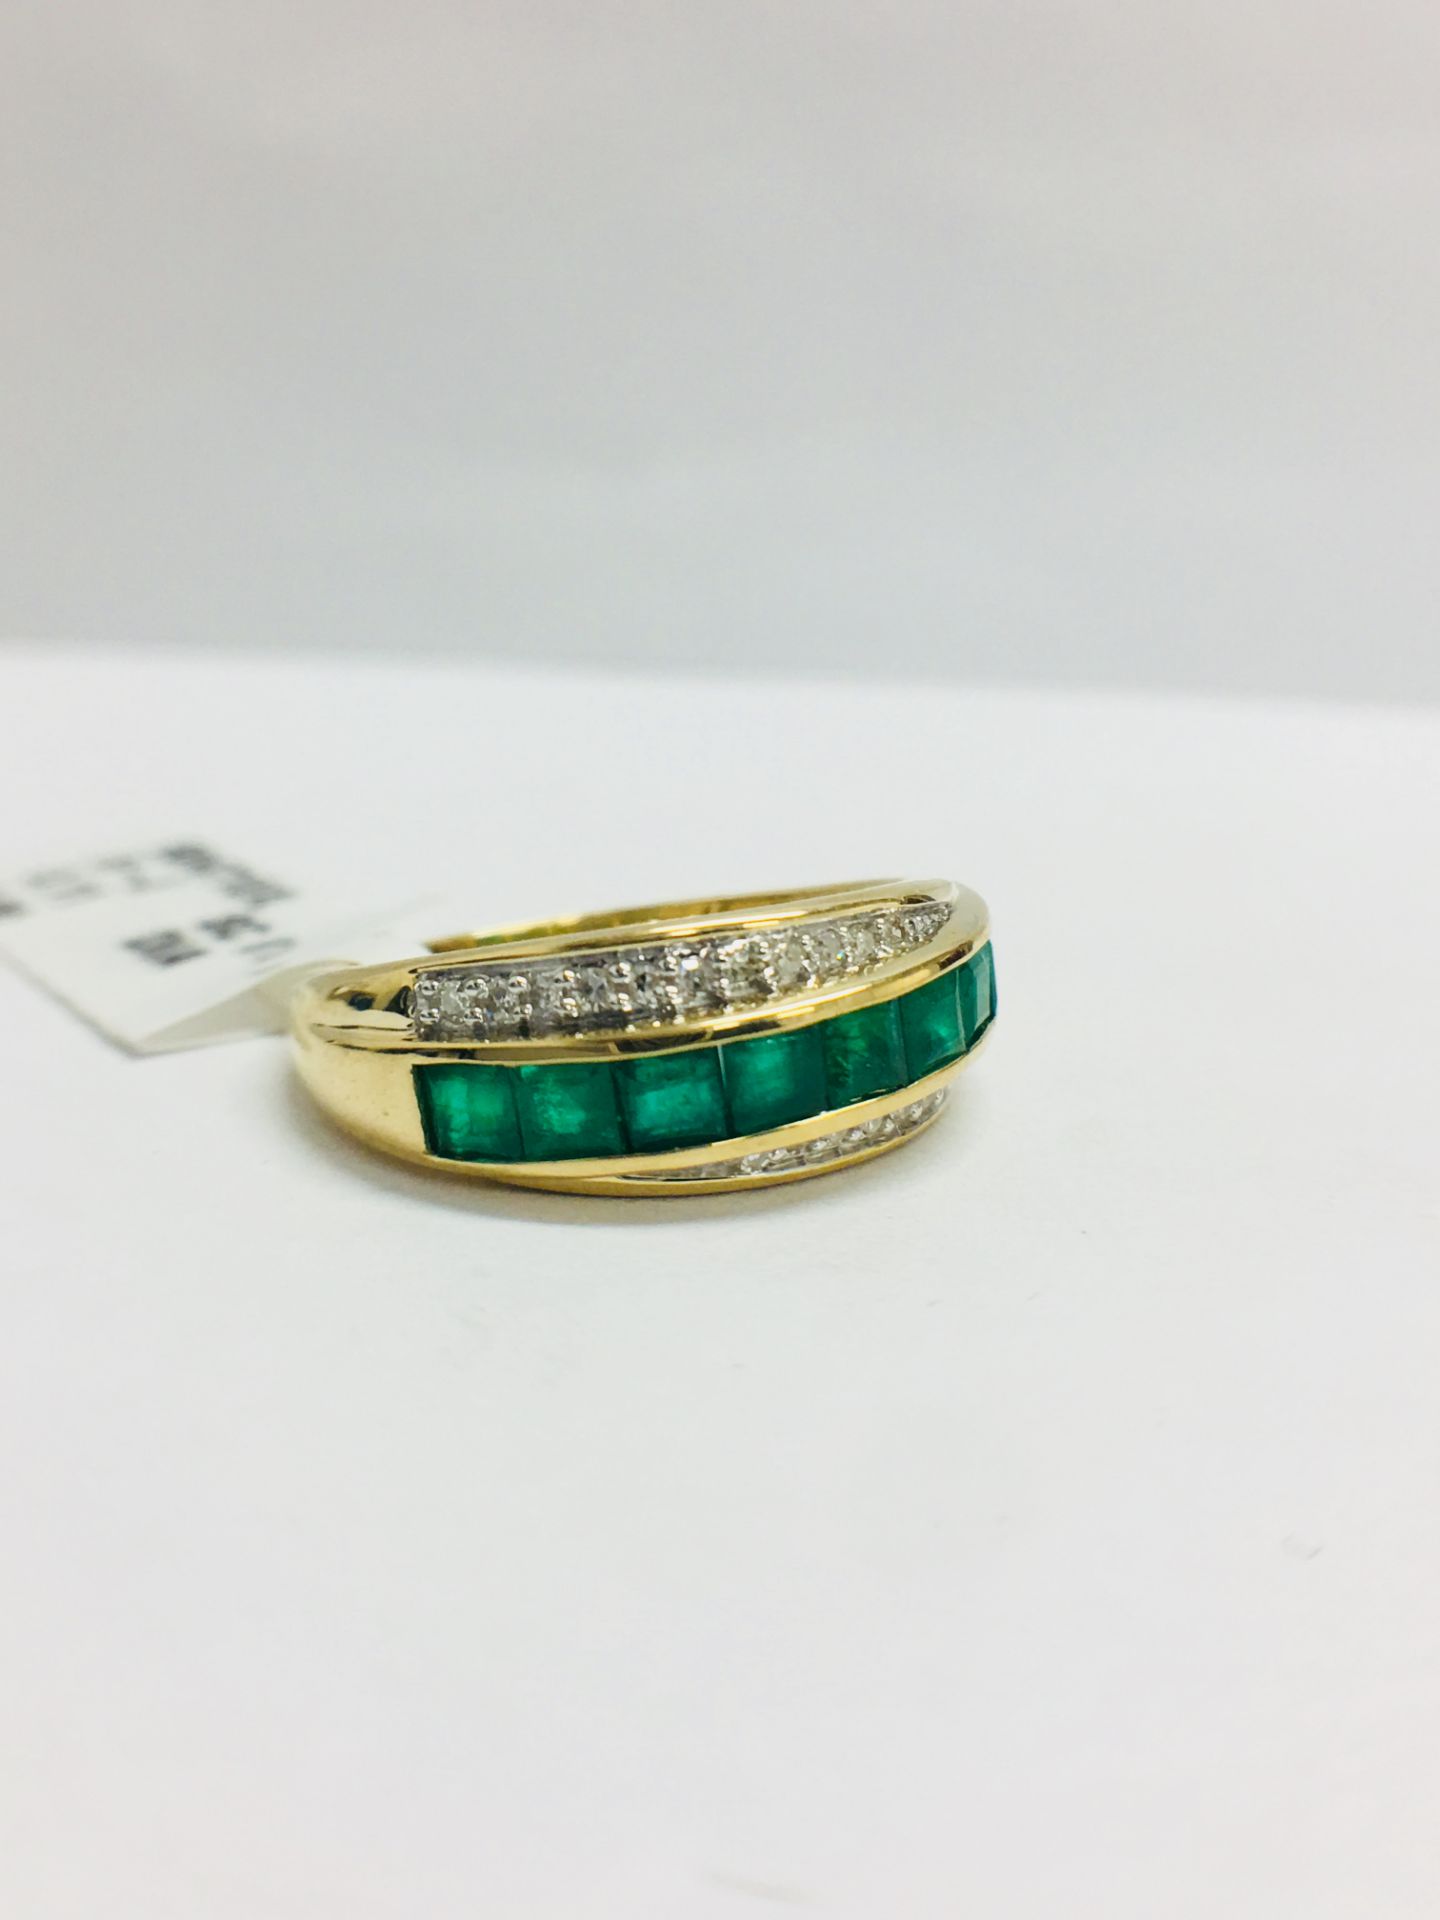 9Ct Yellow Gold Diamond Emerald Crossover Style Ring - Image 6 of 7